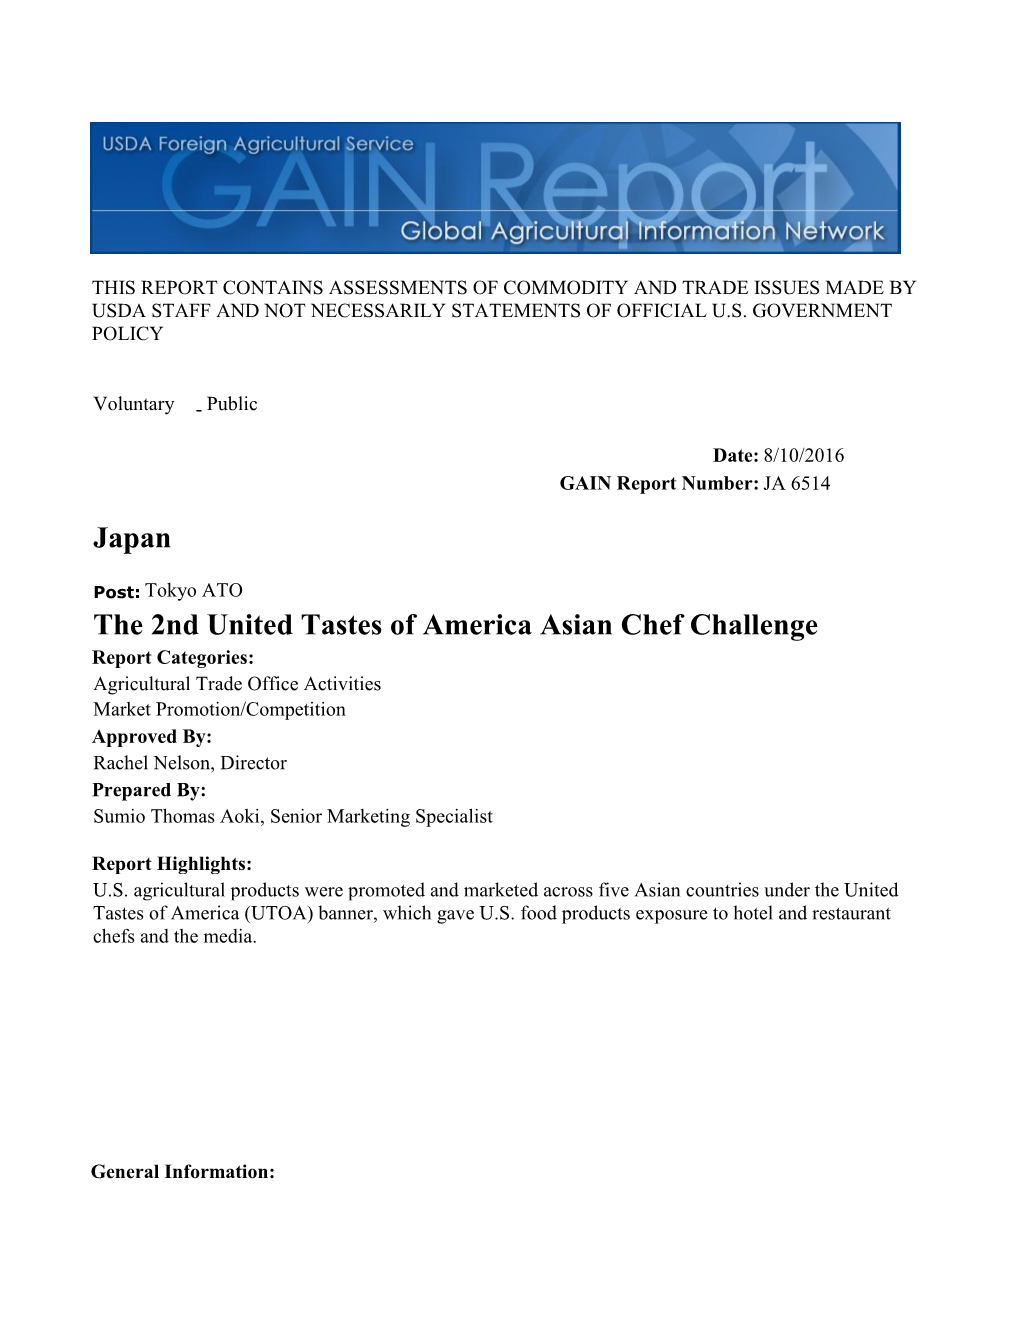 The 2Nd United Tastes of America Asian Chef Challenge